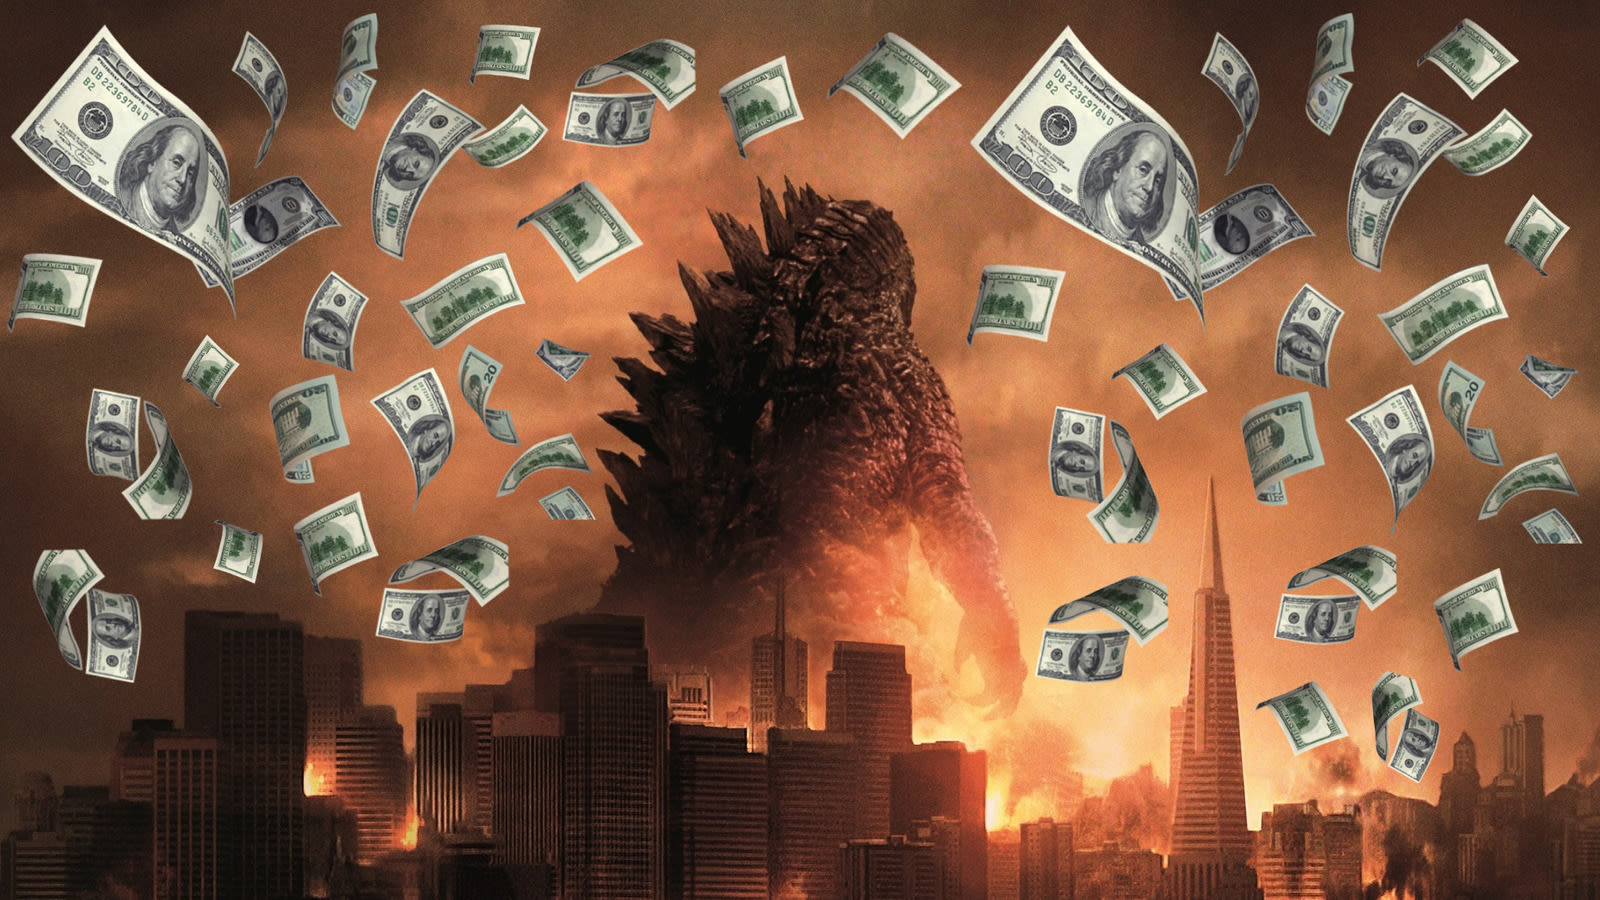 2014's Godzilla Was A Divisive Box Office Hit That Paved The Way For So Much More - SlashFilm